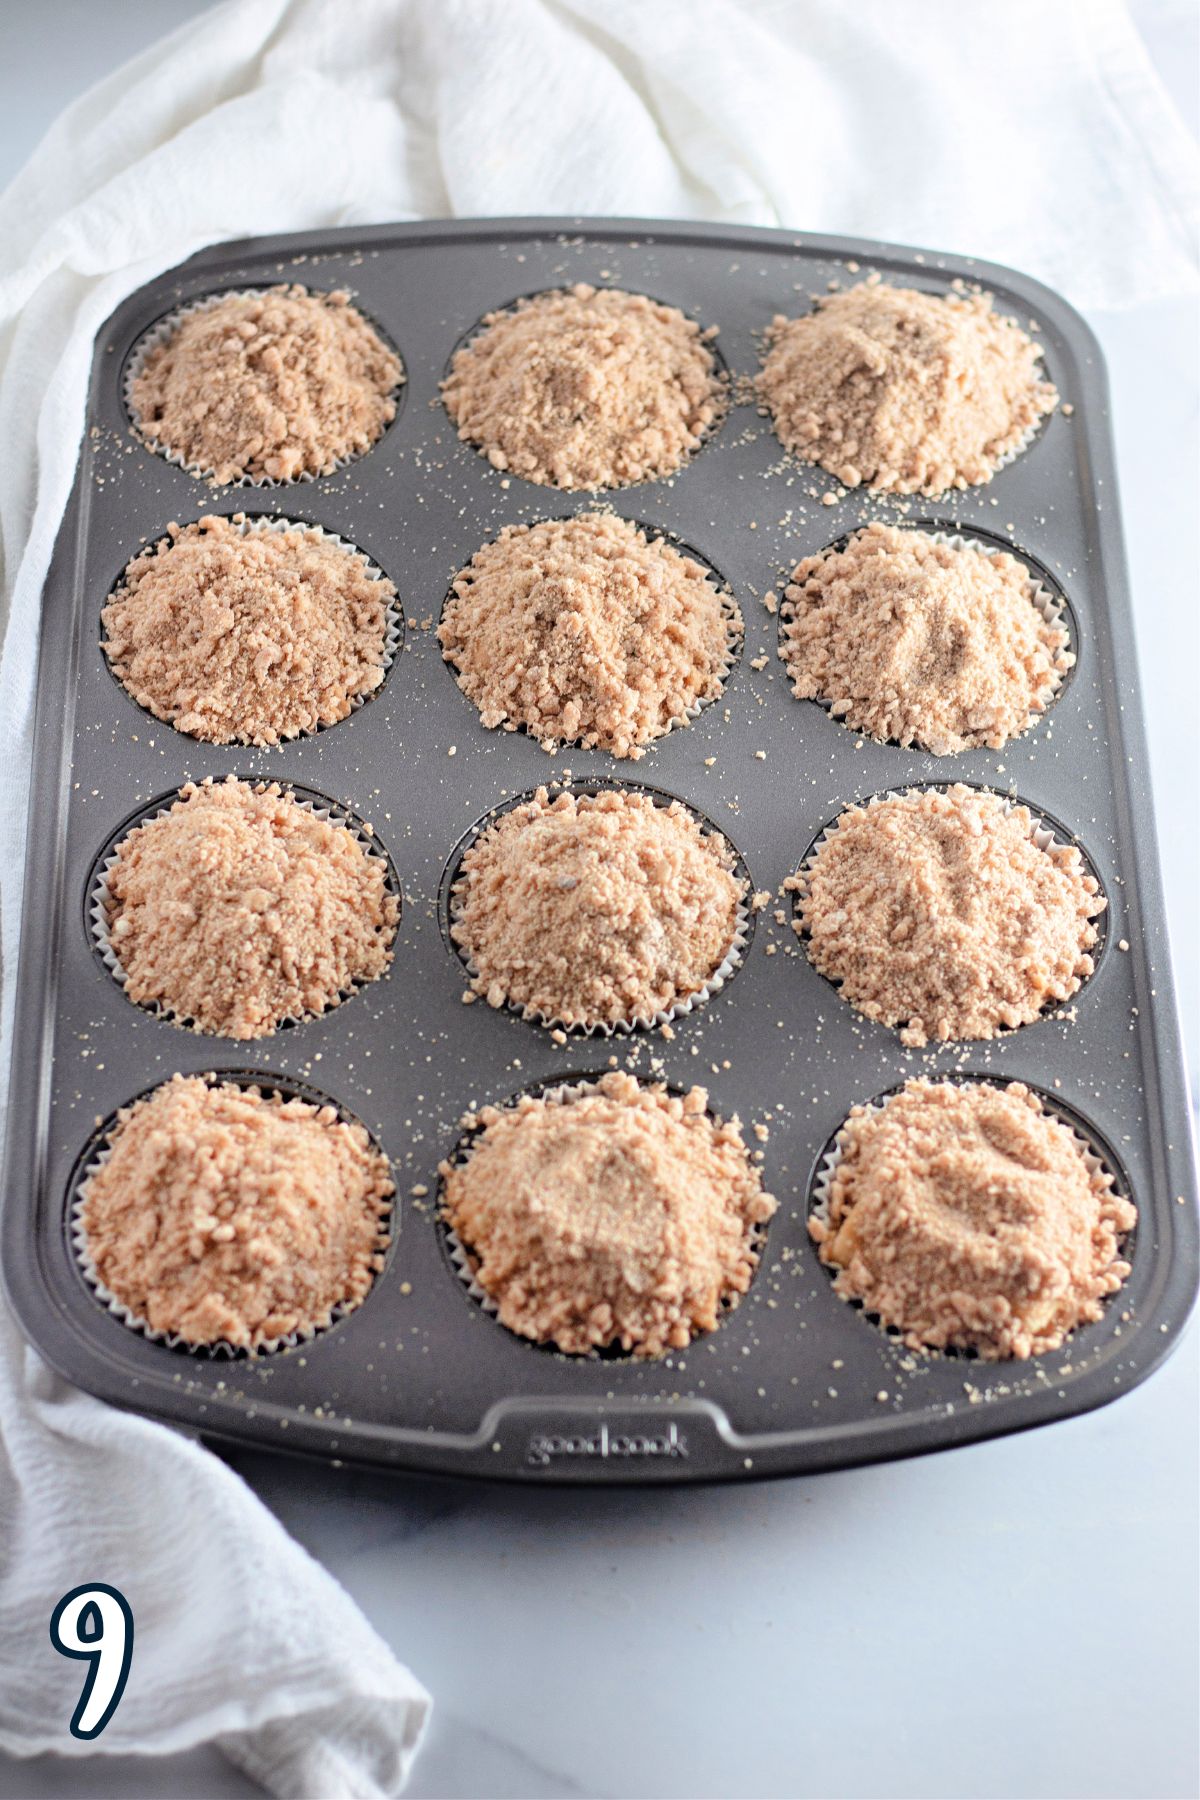 Crumb topping over apple muffin batter in a muffin tin. 